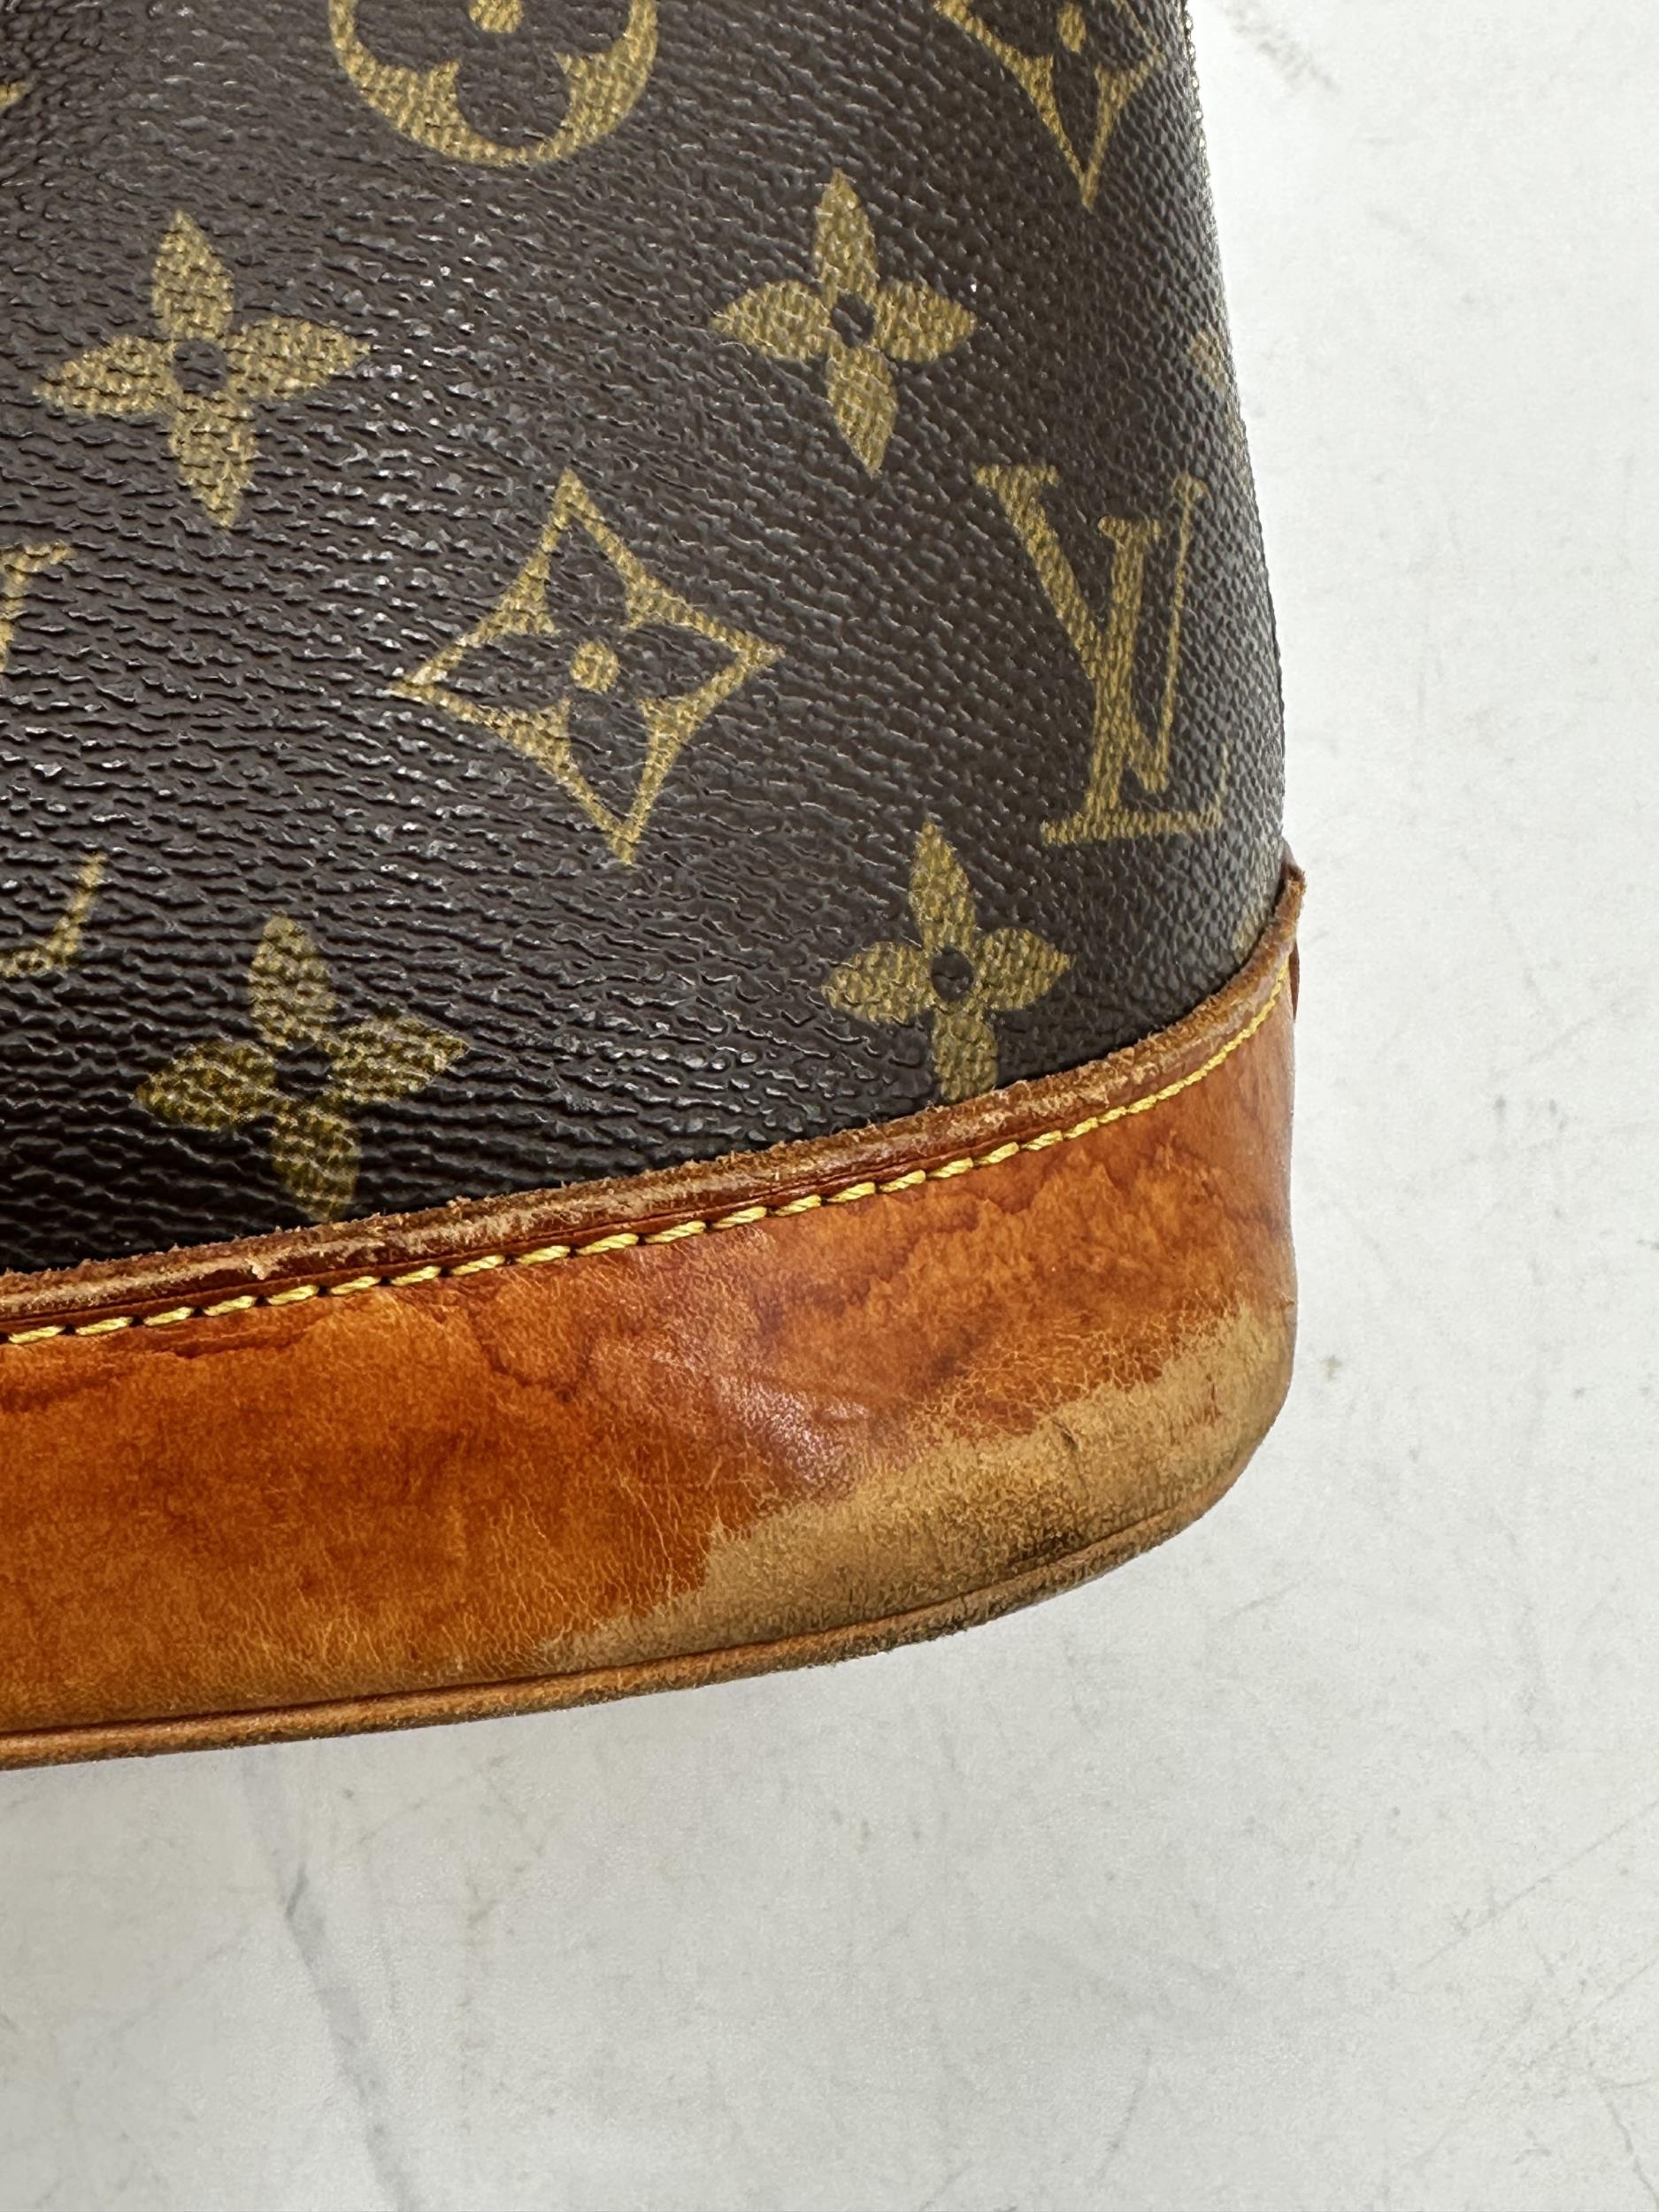 LOUIS VUITTON handbag, condition - used condition, all over wear and staining to leather and wear to - Image 11 of 15